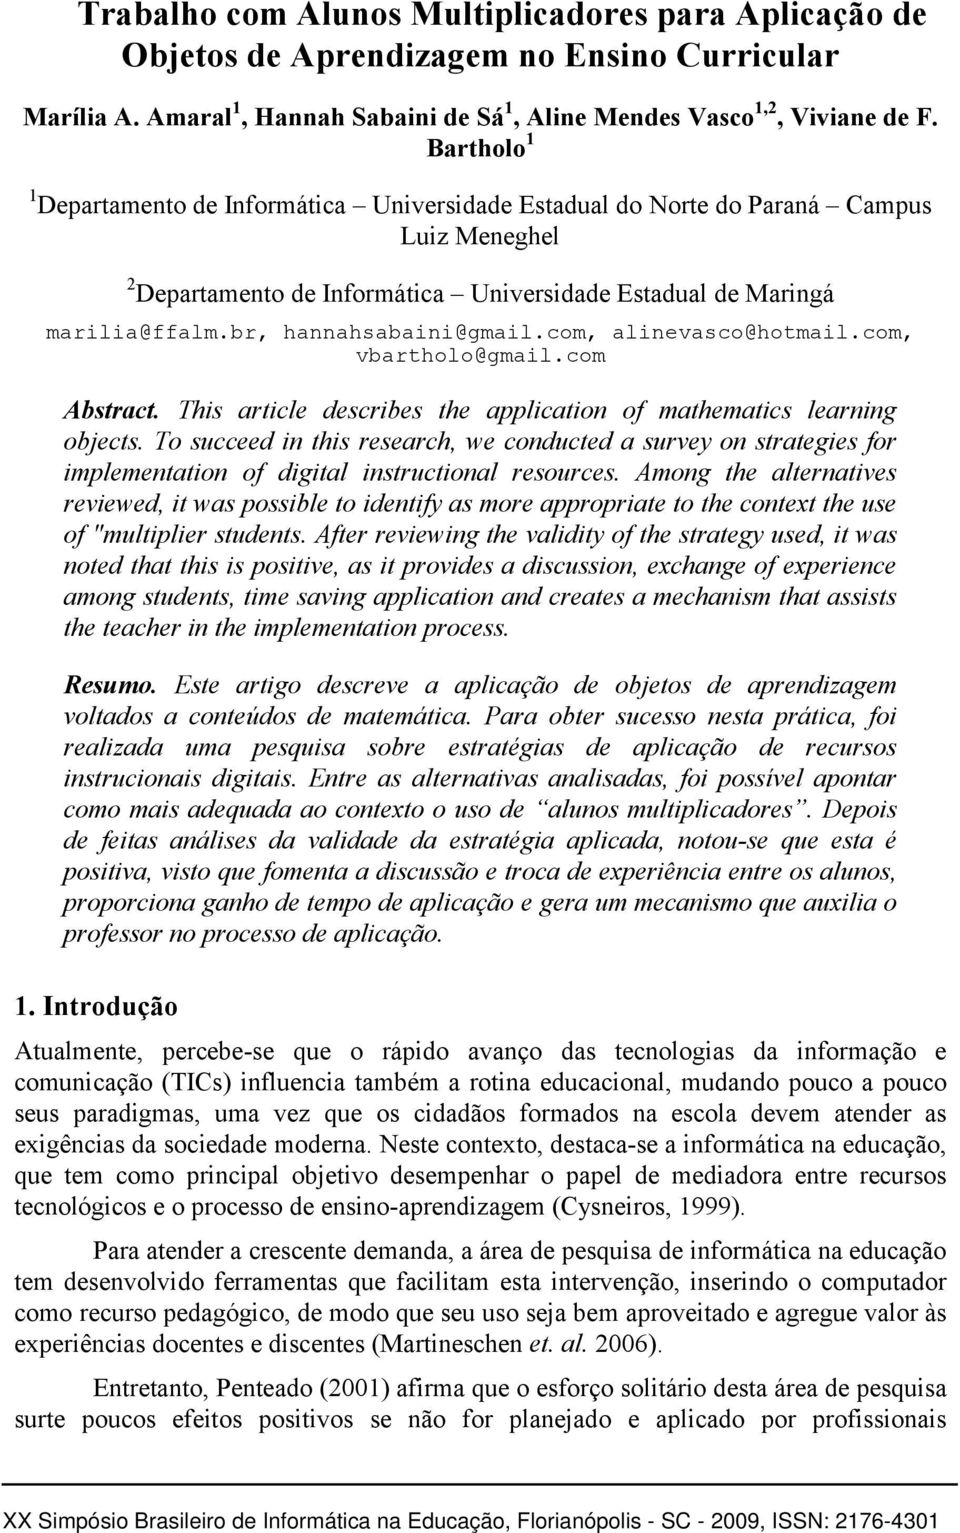 br, hannahsabaini@gmail.com, alinevasco@hotmail.com, vbartholo@gmail.com Abstract. This article describes the application of mathematics learning objects.